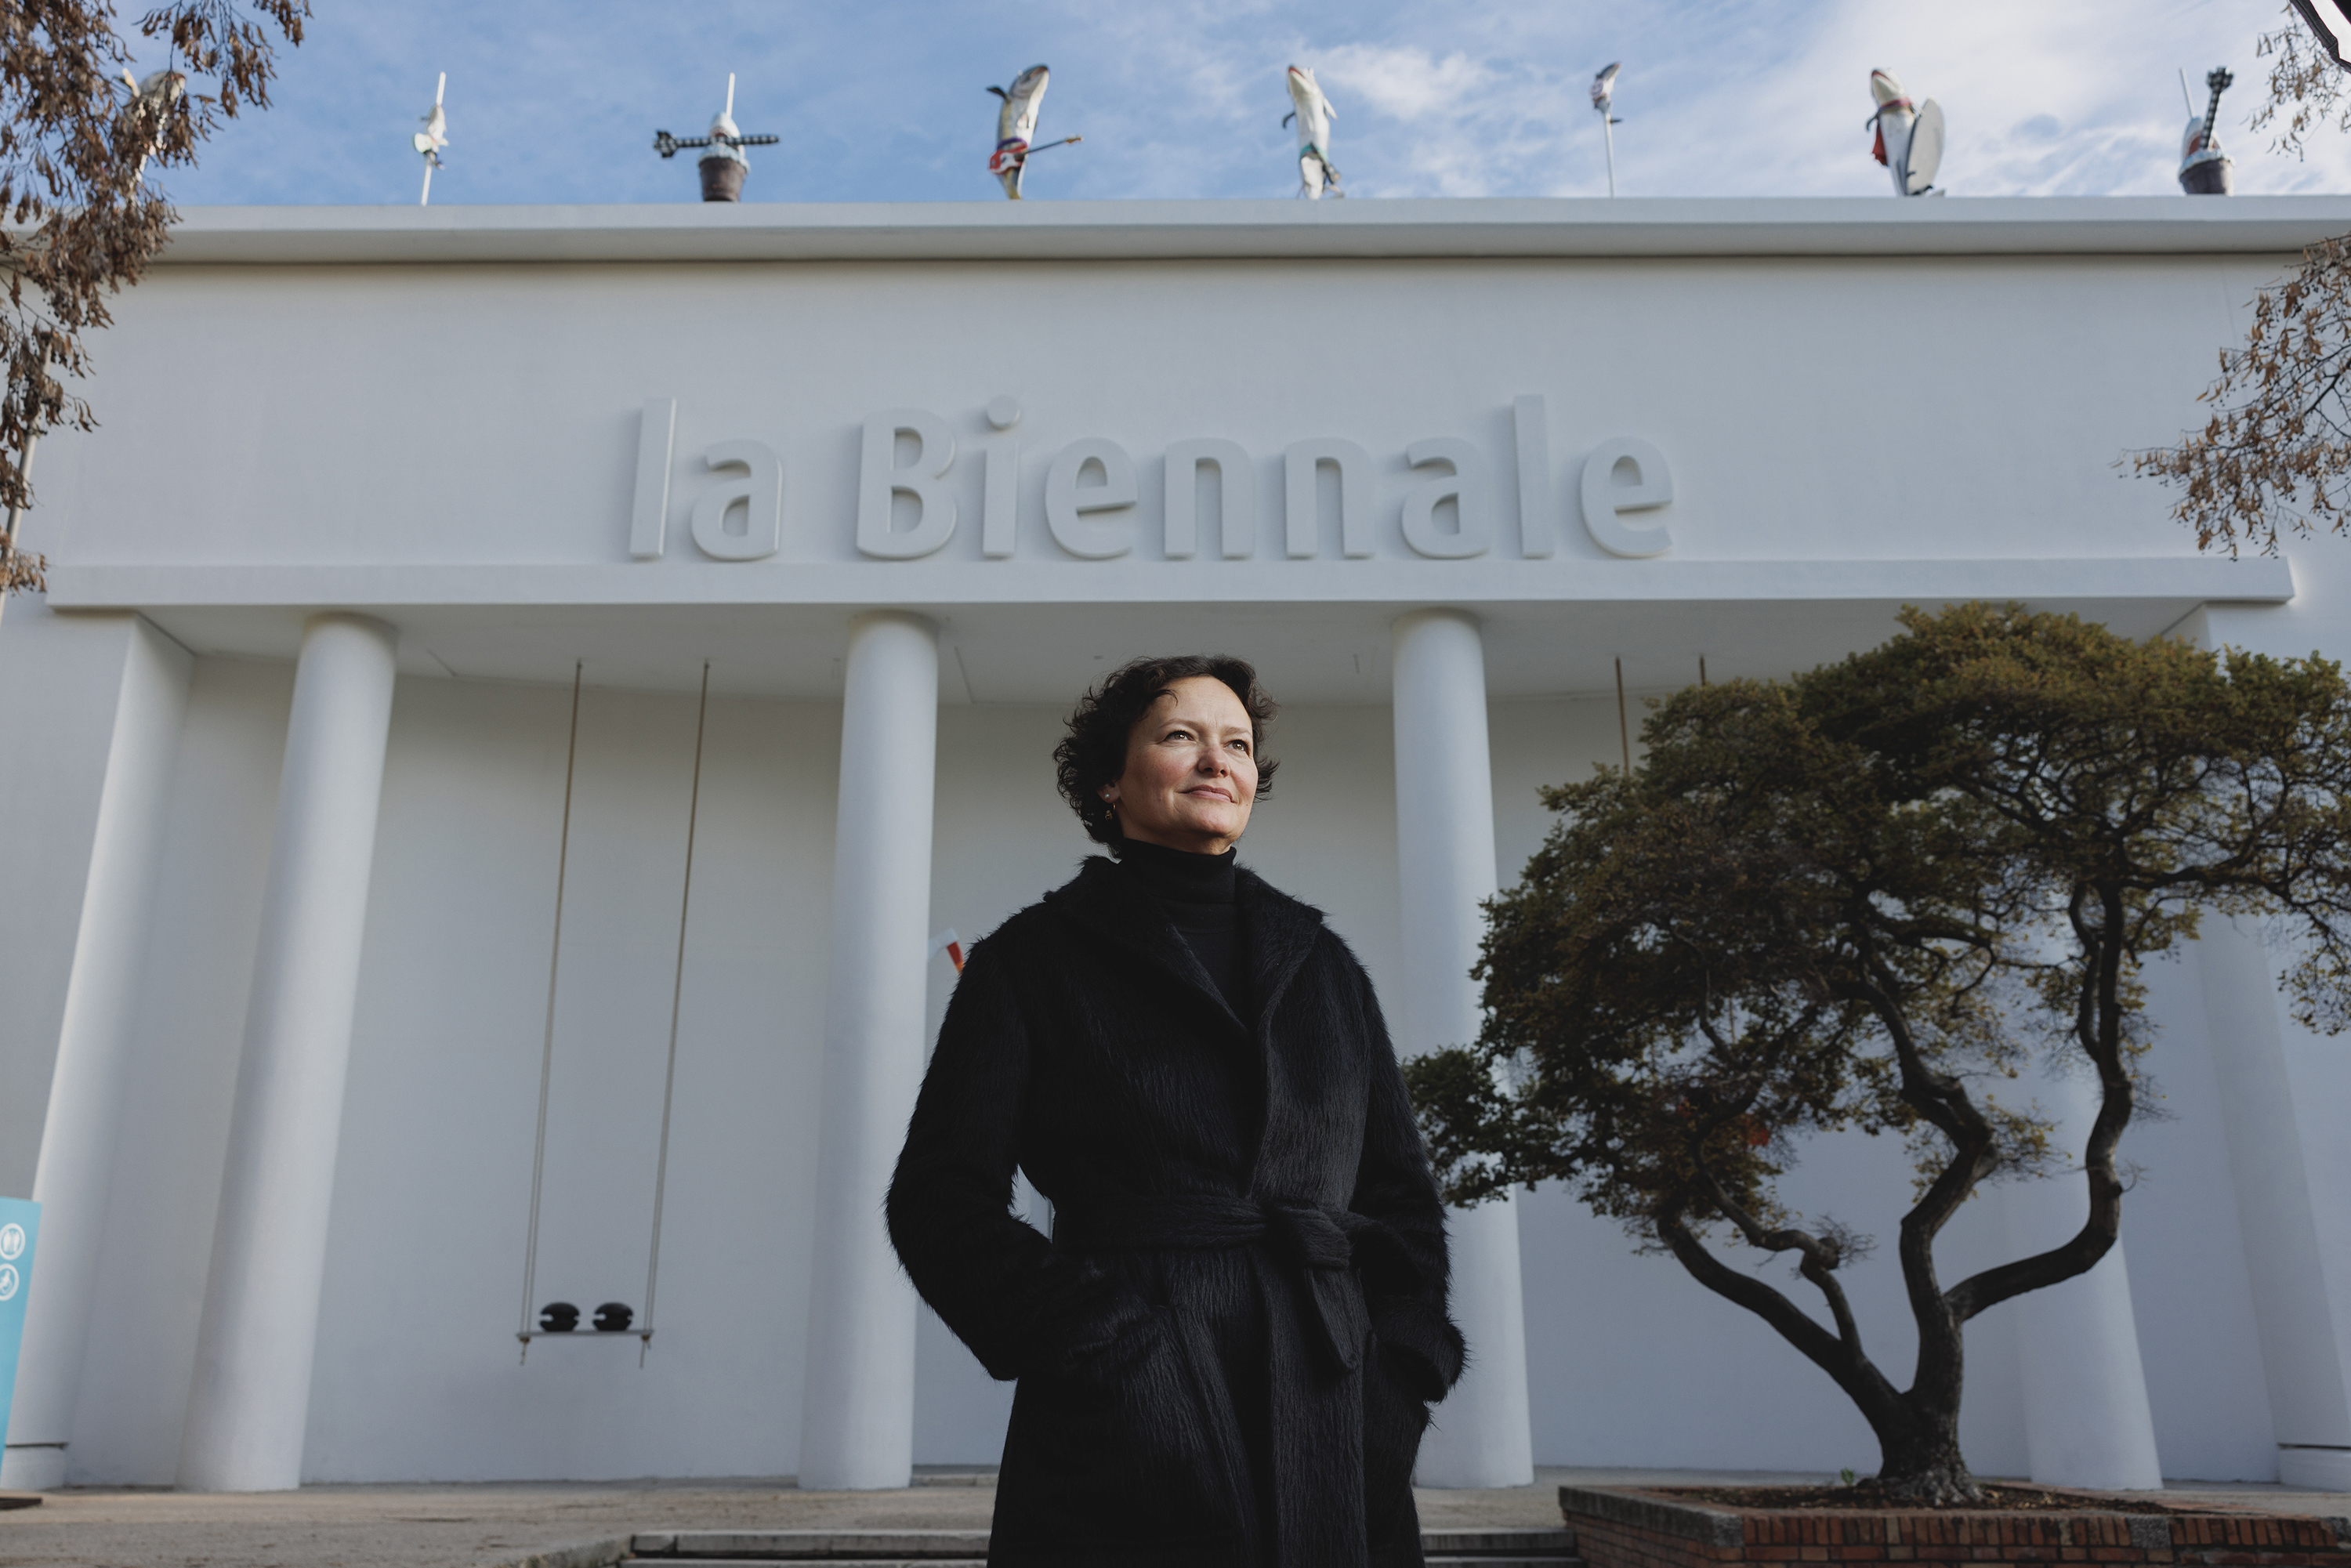 A woman with light skin tone and short dark curly hair wearing a black furry trench coat stands in front of a modern white building with four columns and 